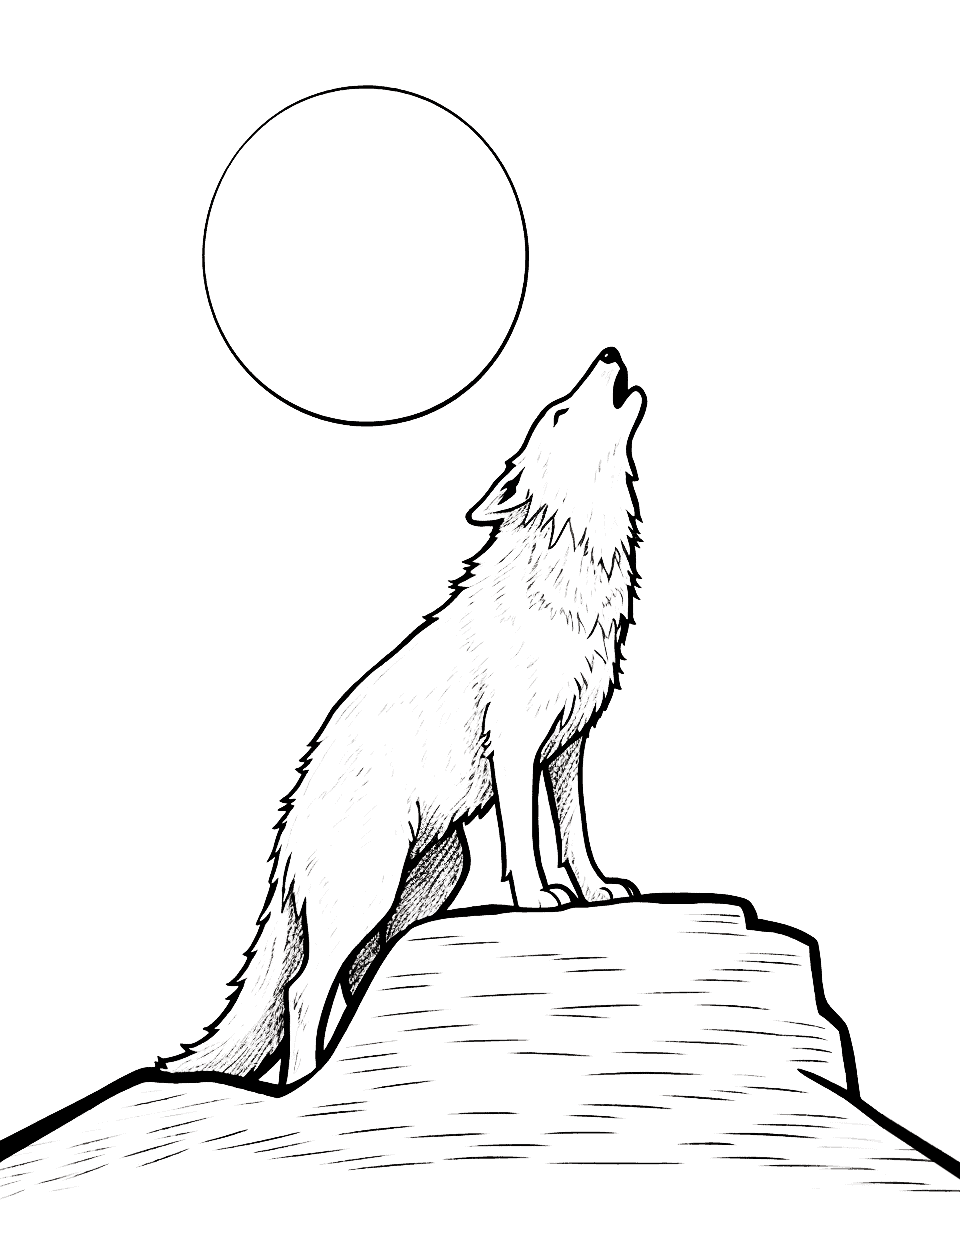 Wolf Howling at the Moon Animal Coloring Page - A wolf standing on a rocky cliff, howling at the full moon.